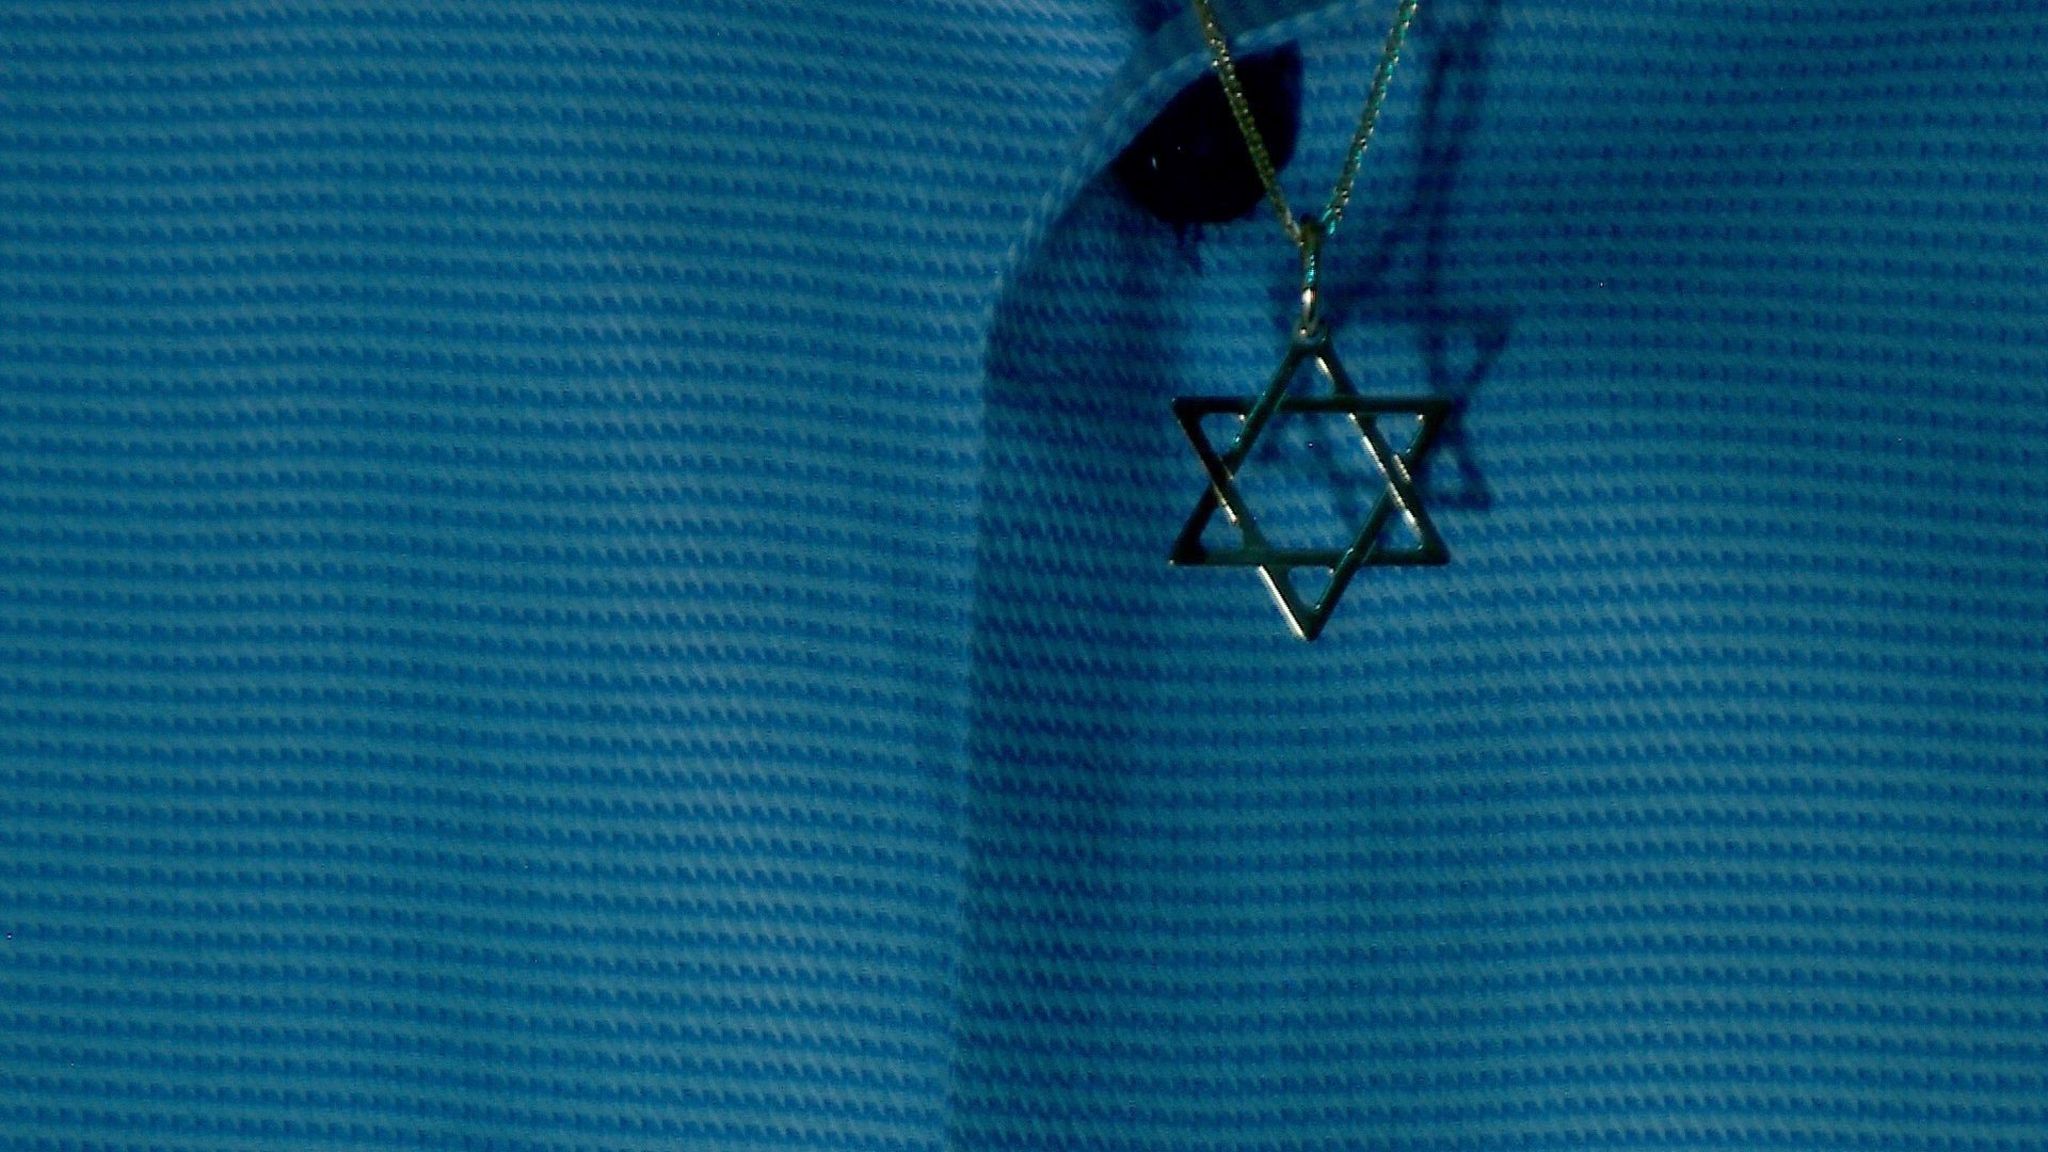 Star of David on a doctor's shirt